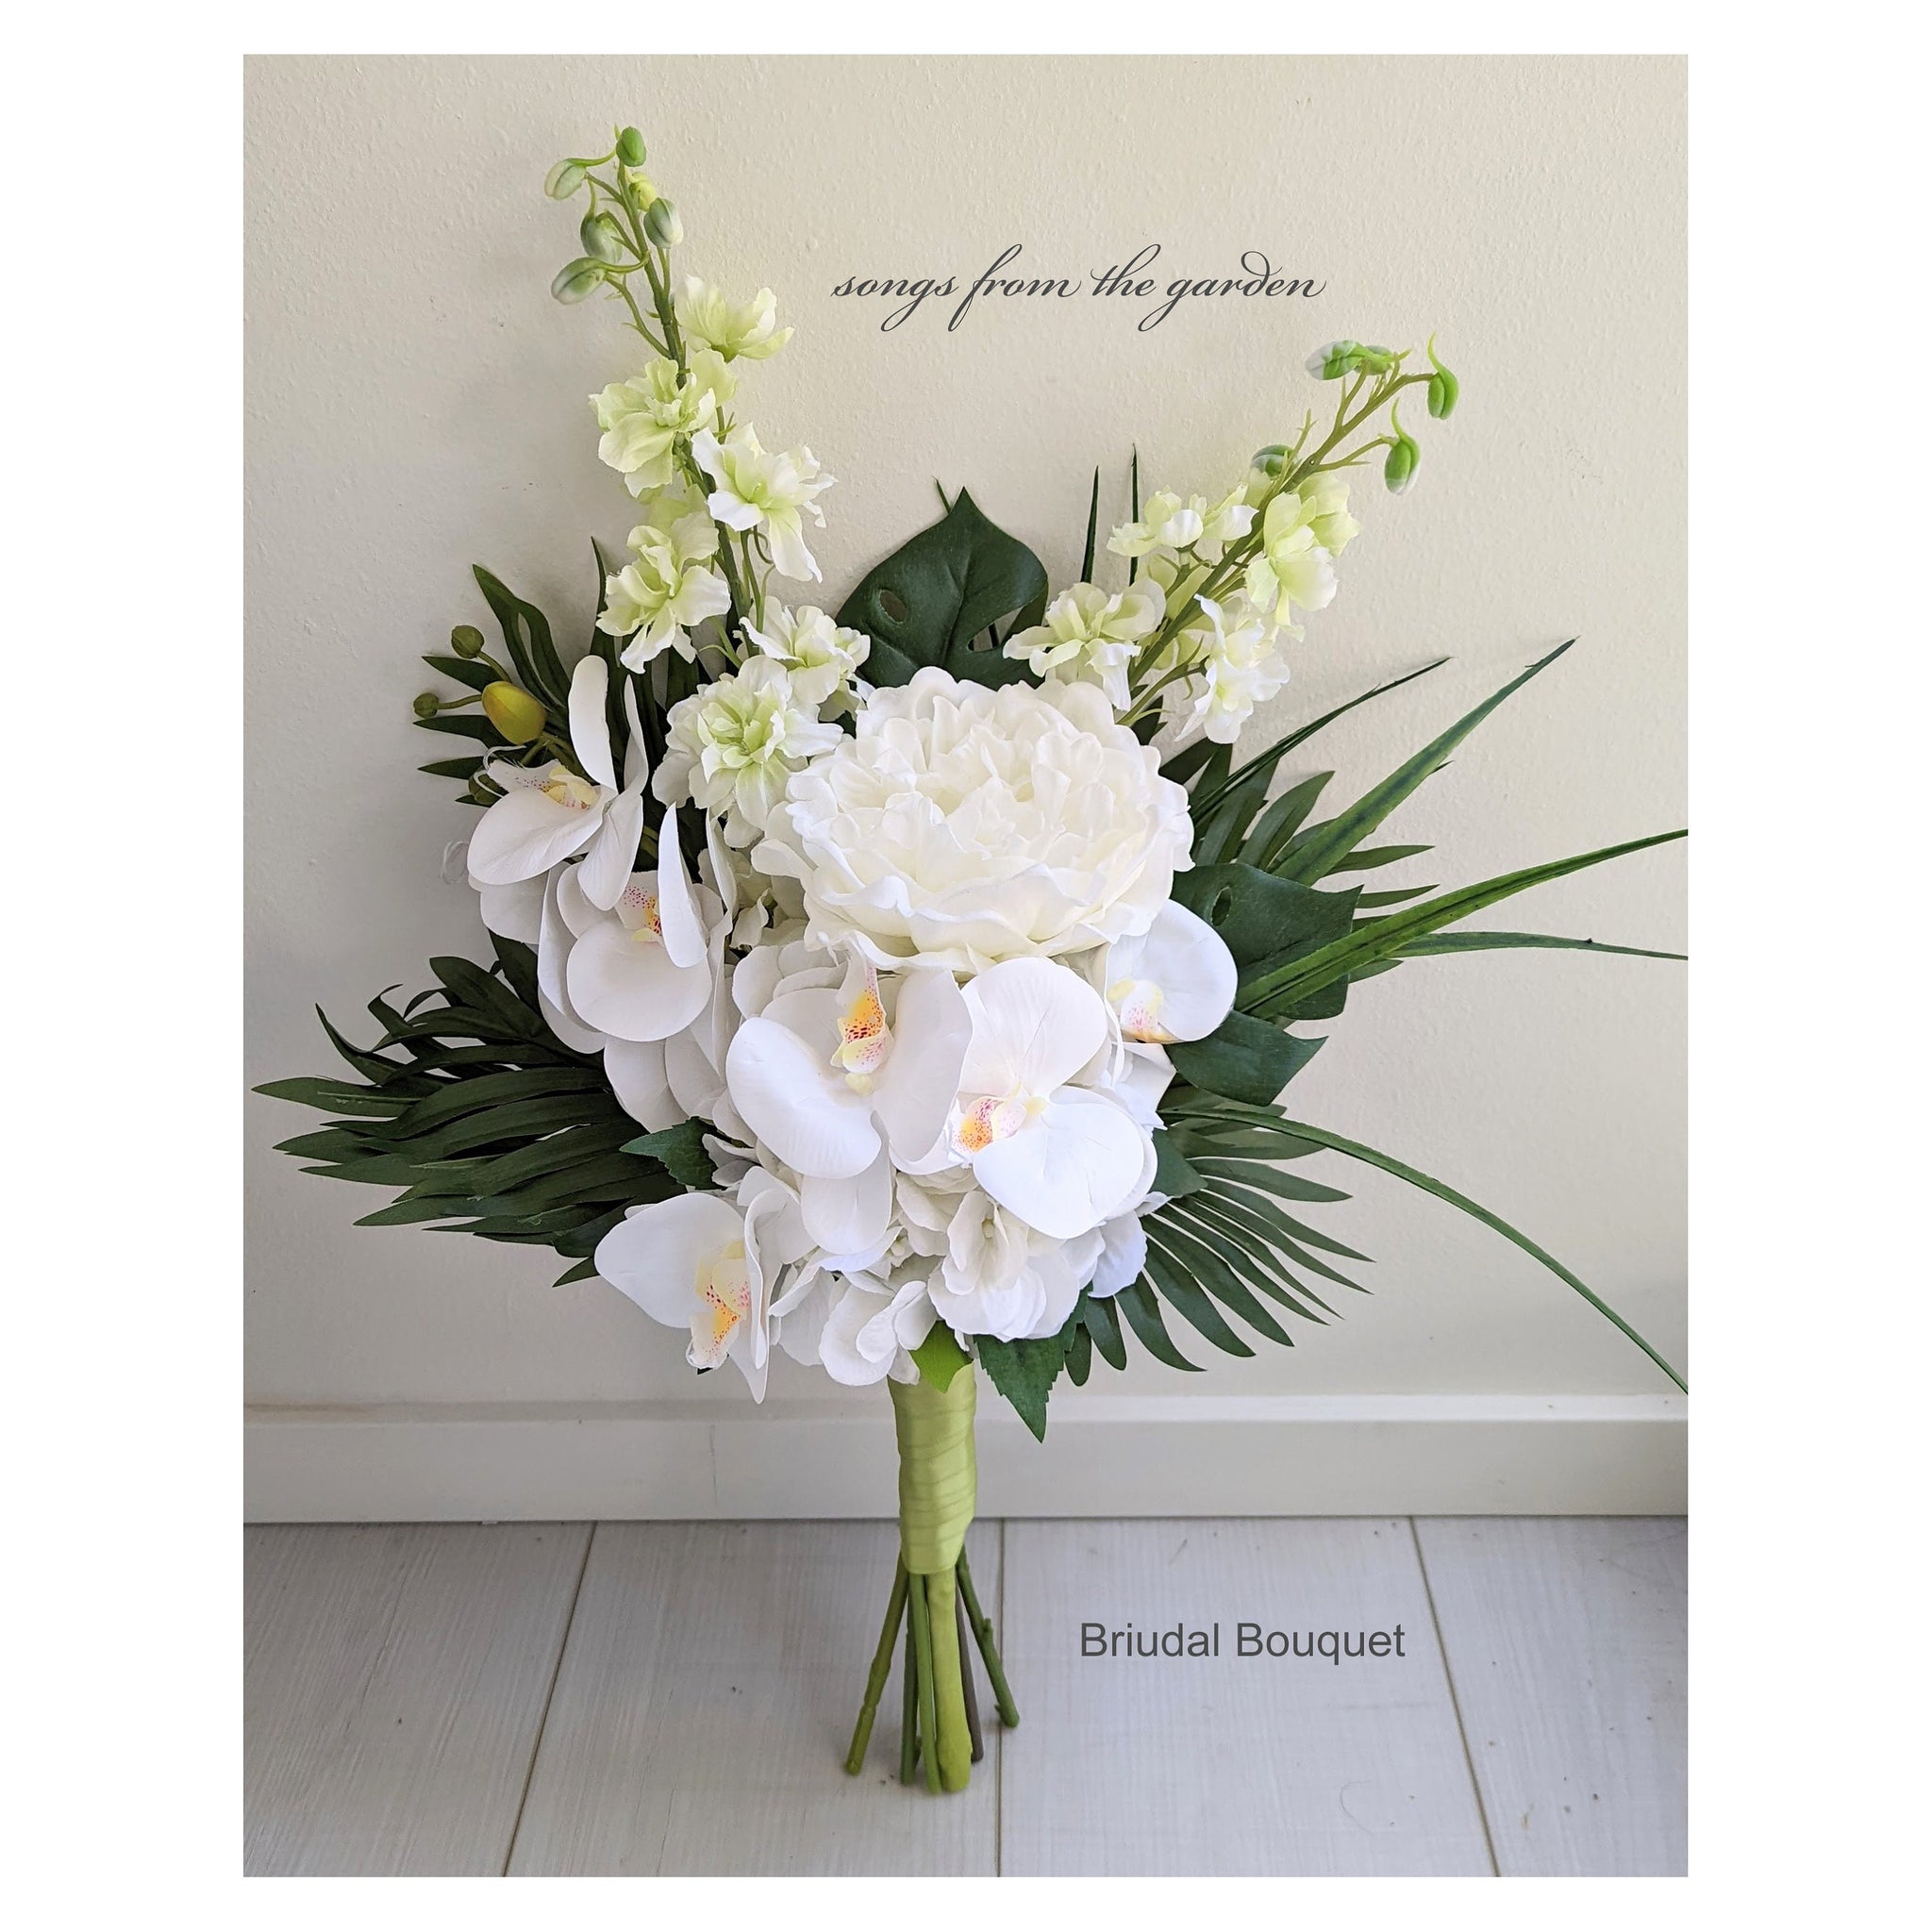 Tropical Wedding Bouquet - Orchids Peonies Palm Greenery - Bridal Bouquet or Bridesmaid Bouquet - add a Groom's or Groomsmen Boutonniere